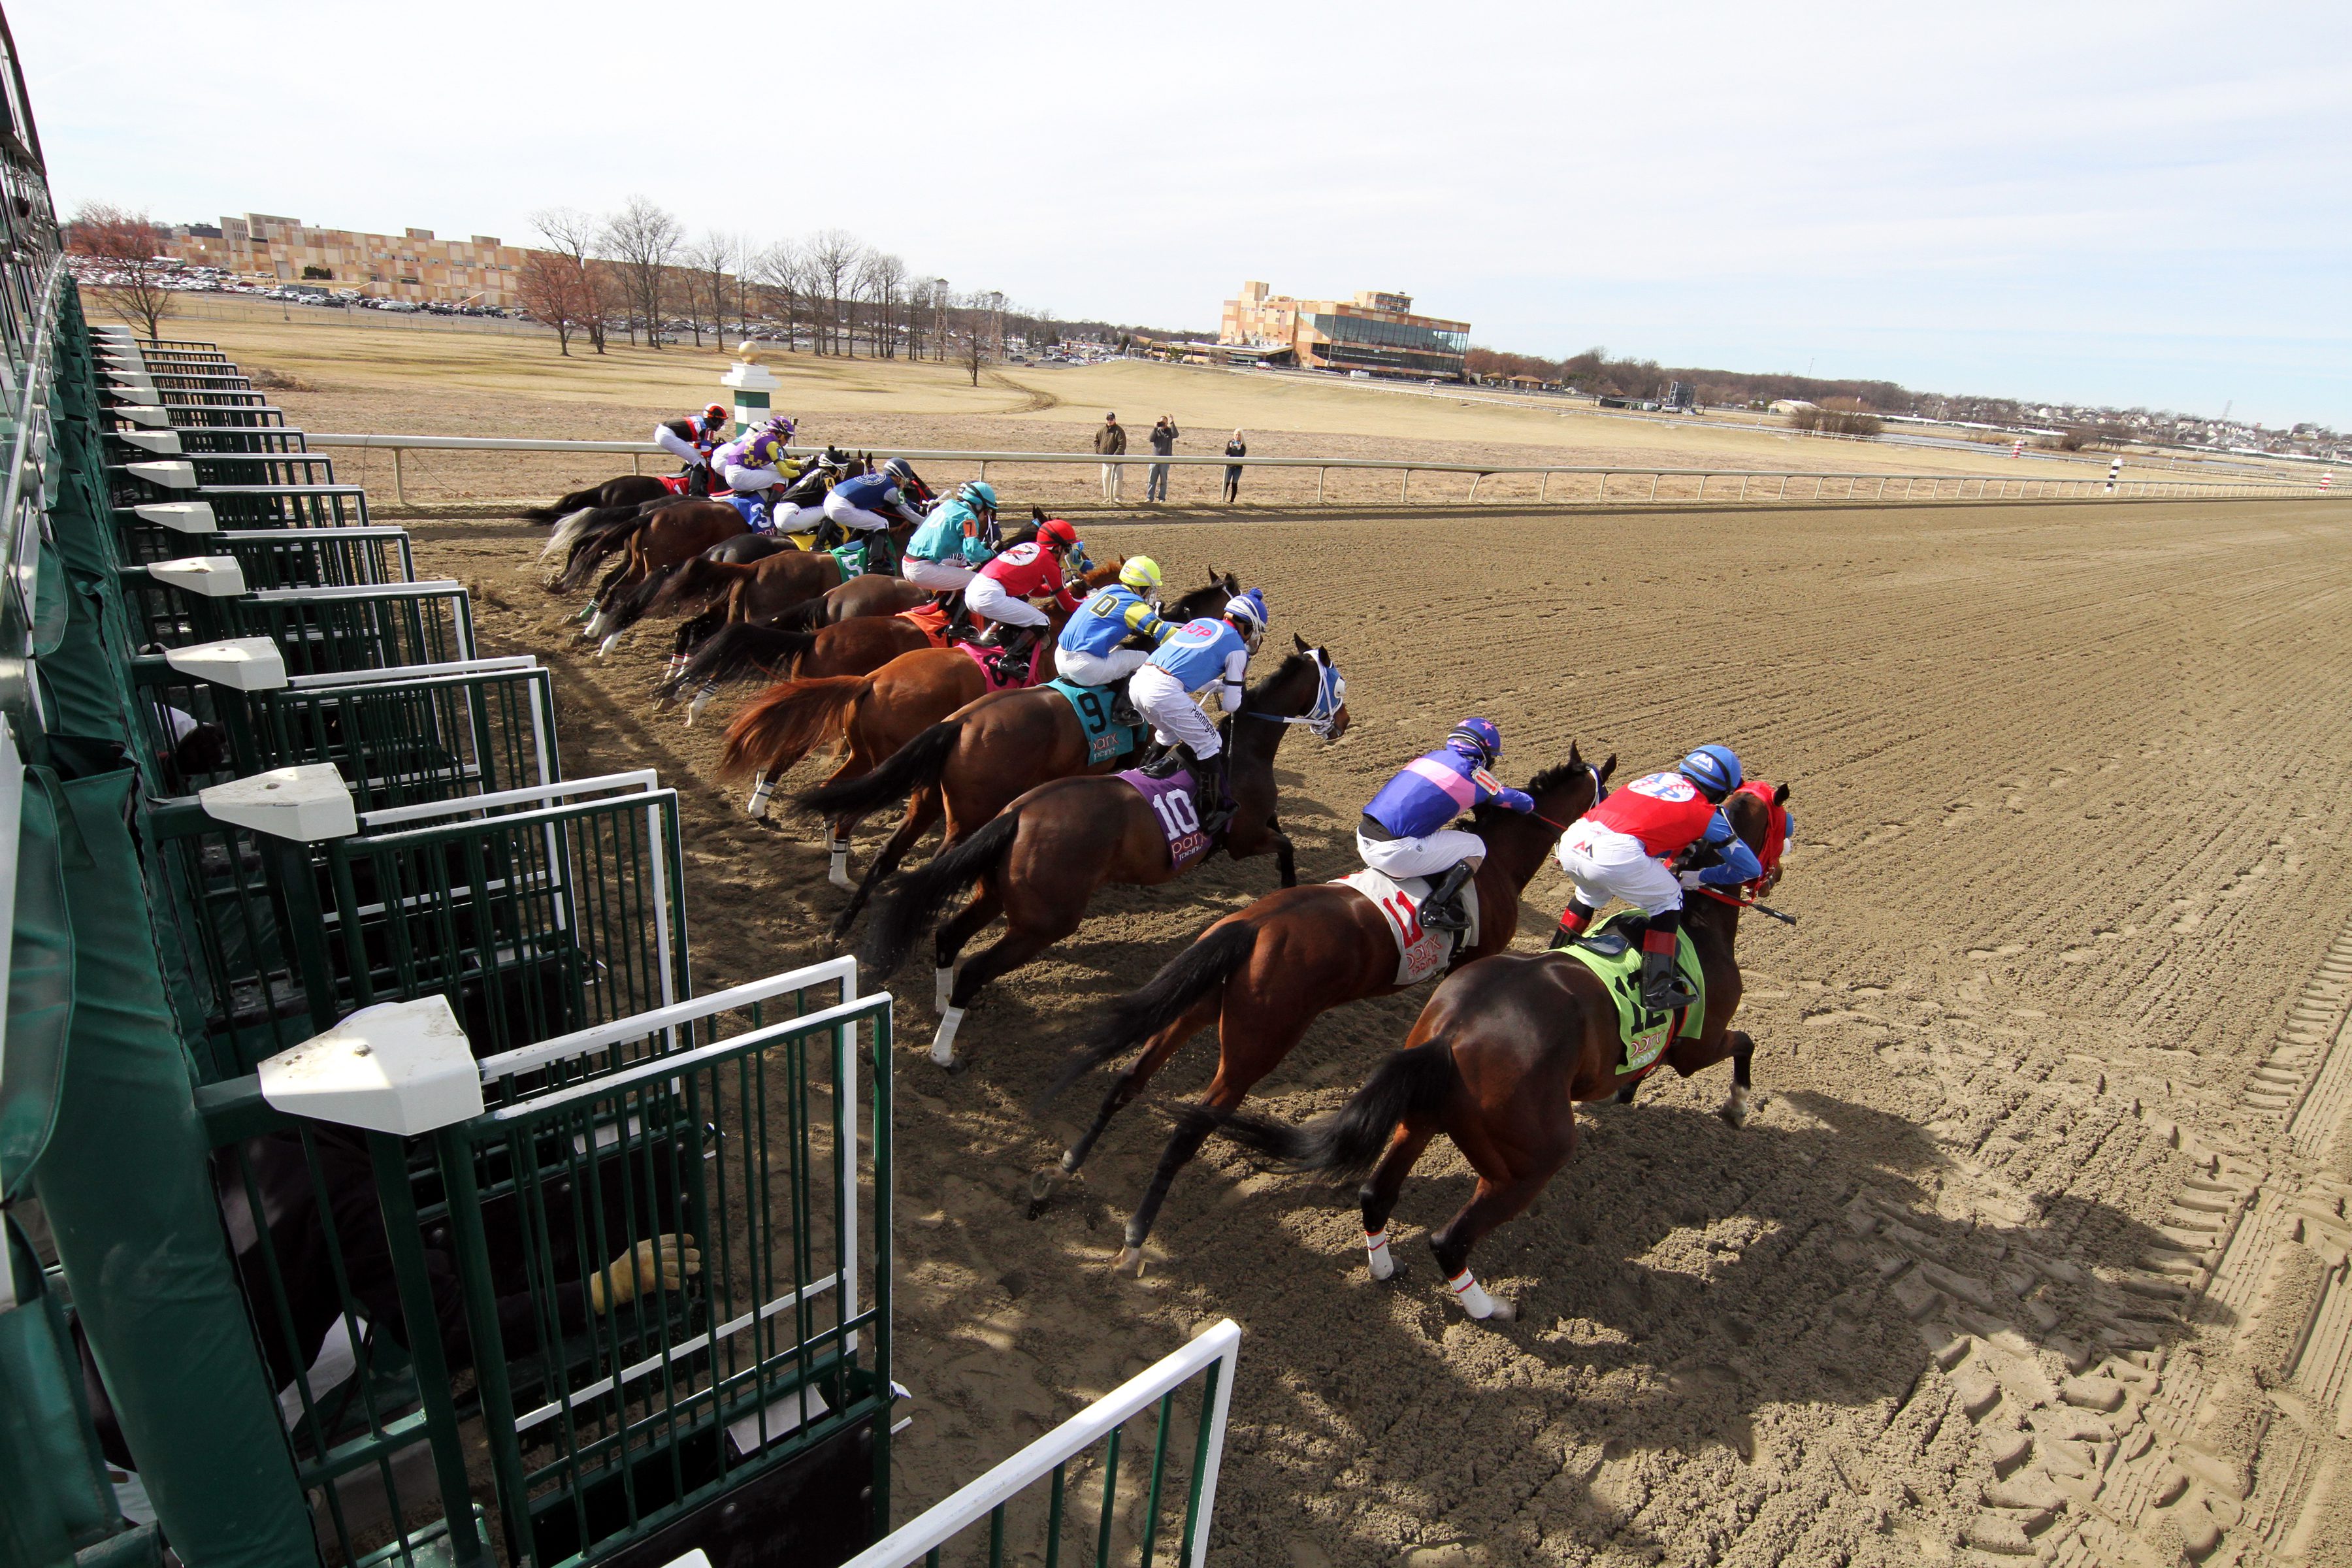 The start of Race 3 at Parx on March 8, 2022. Photo By: Chad B. Harmon